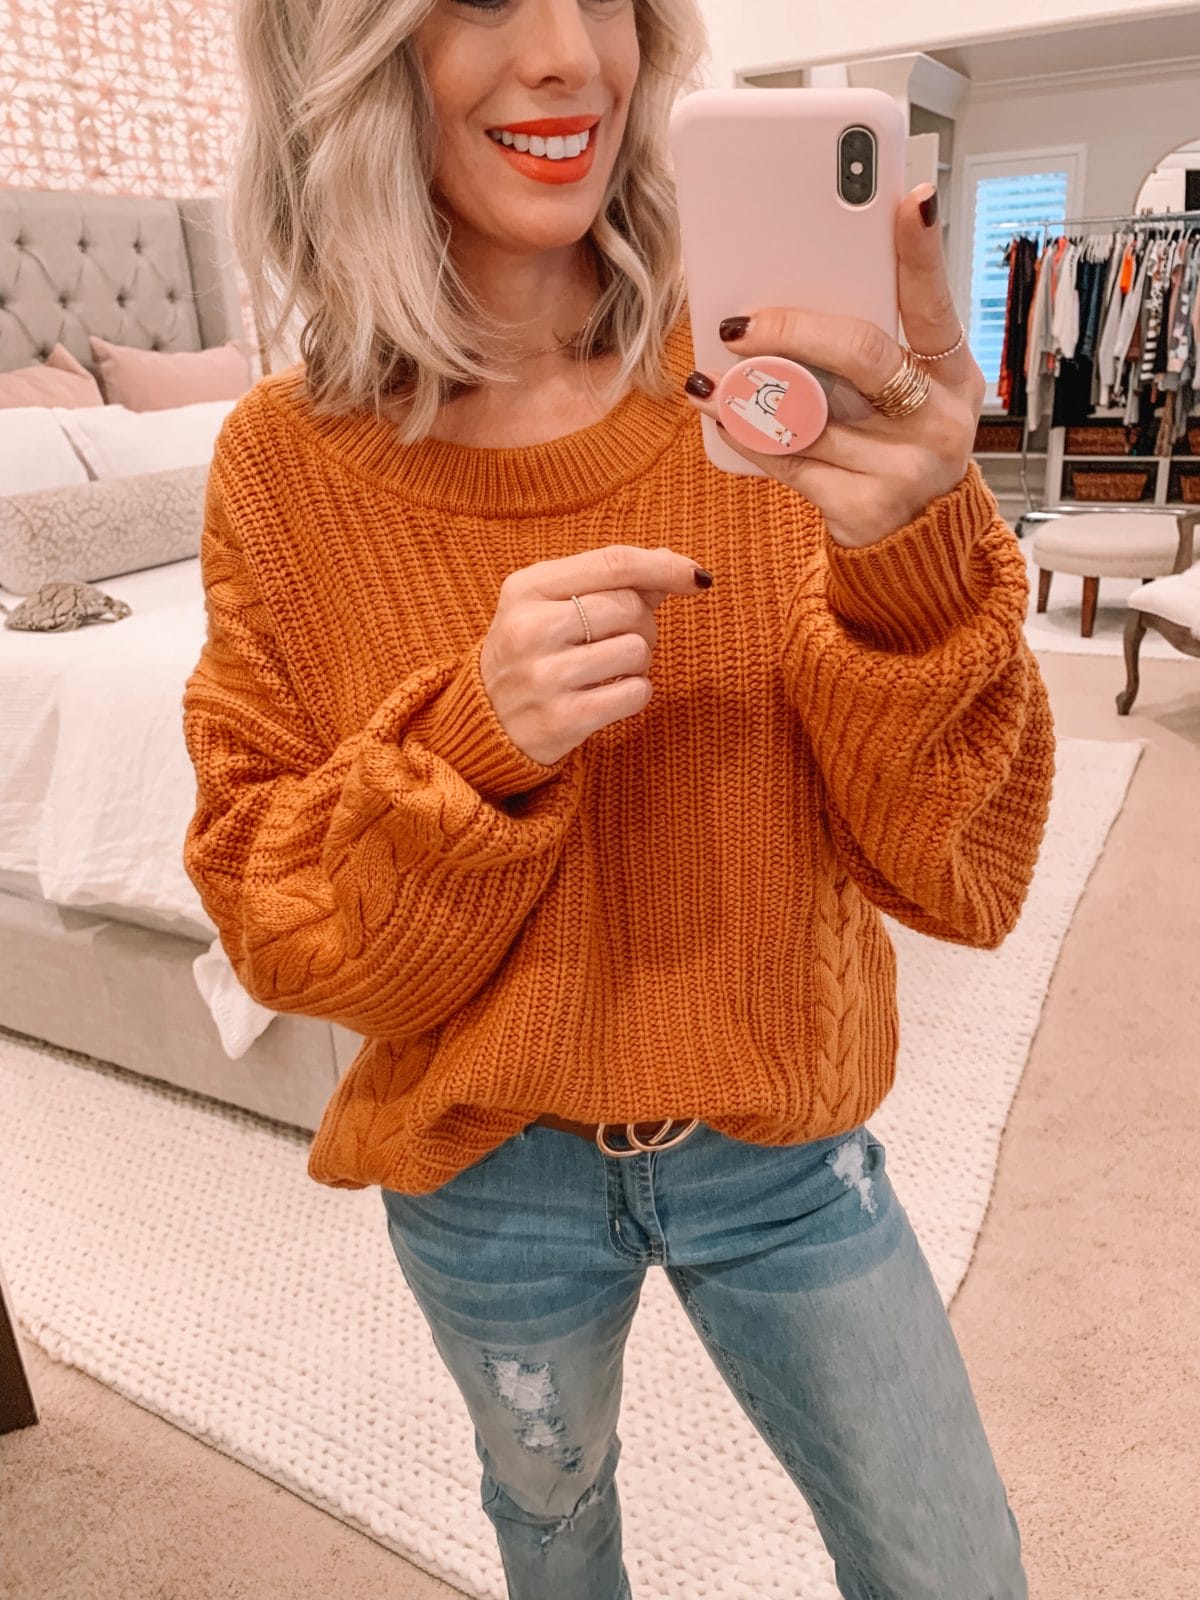 Amazon fashion haul, sweater and jeans 